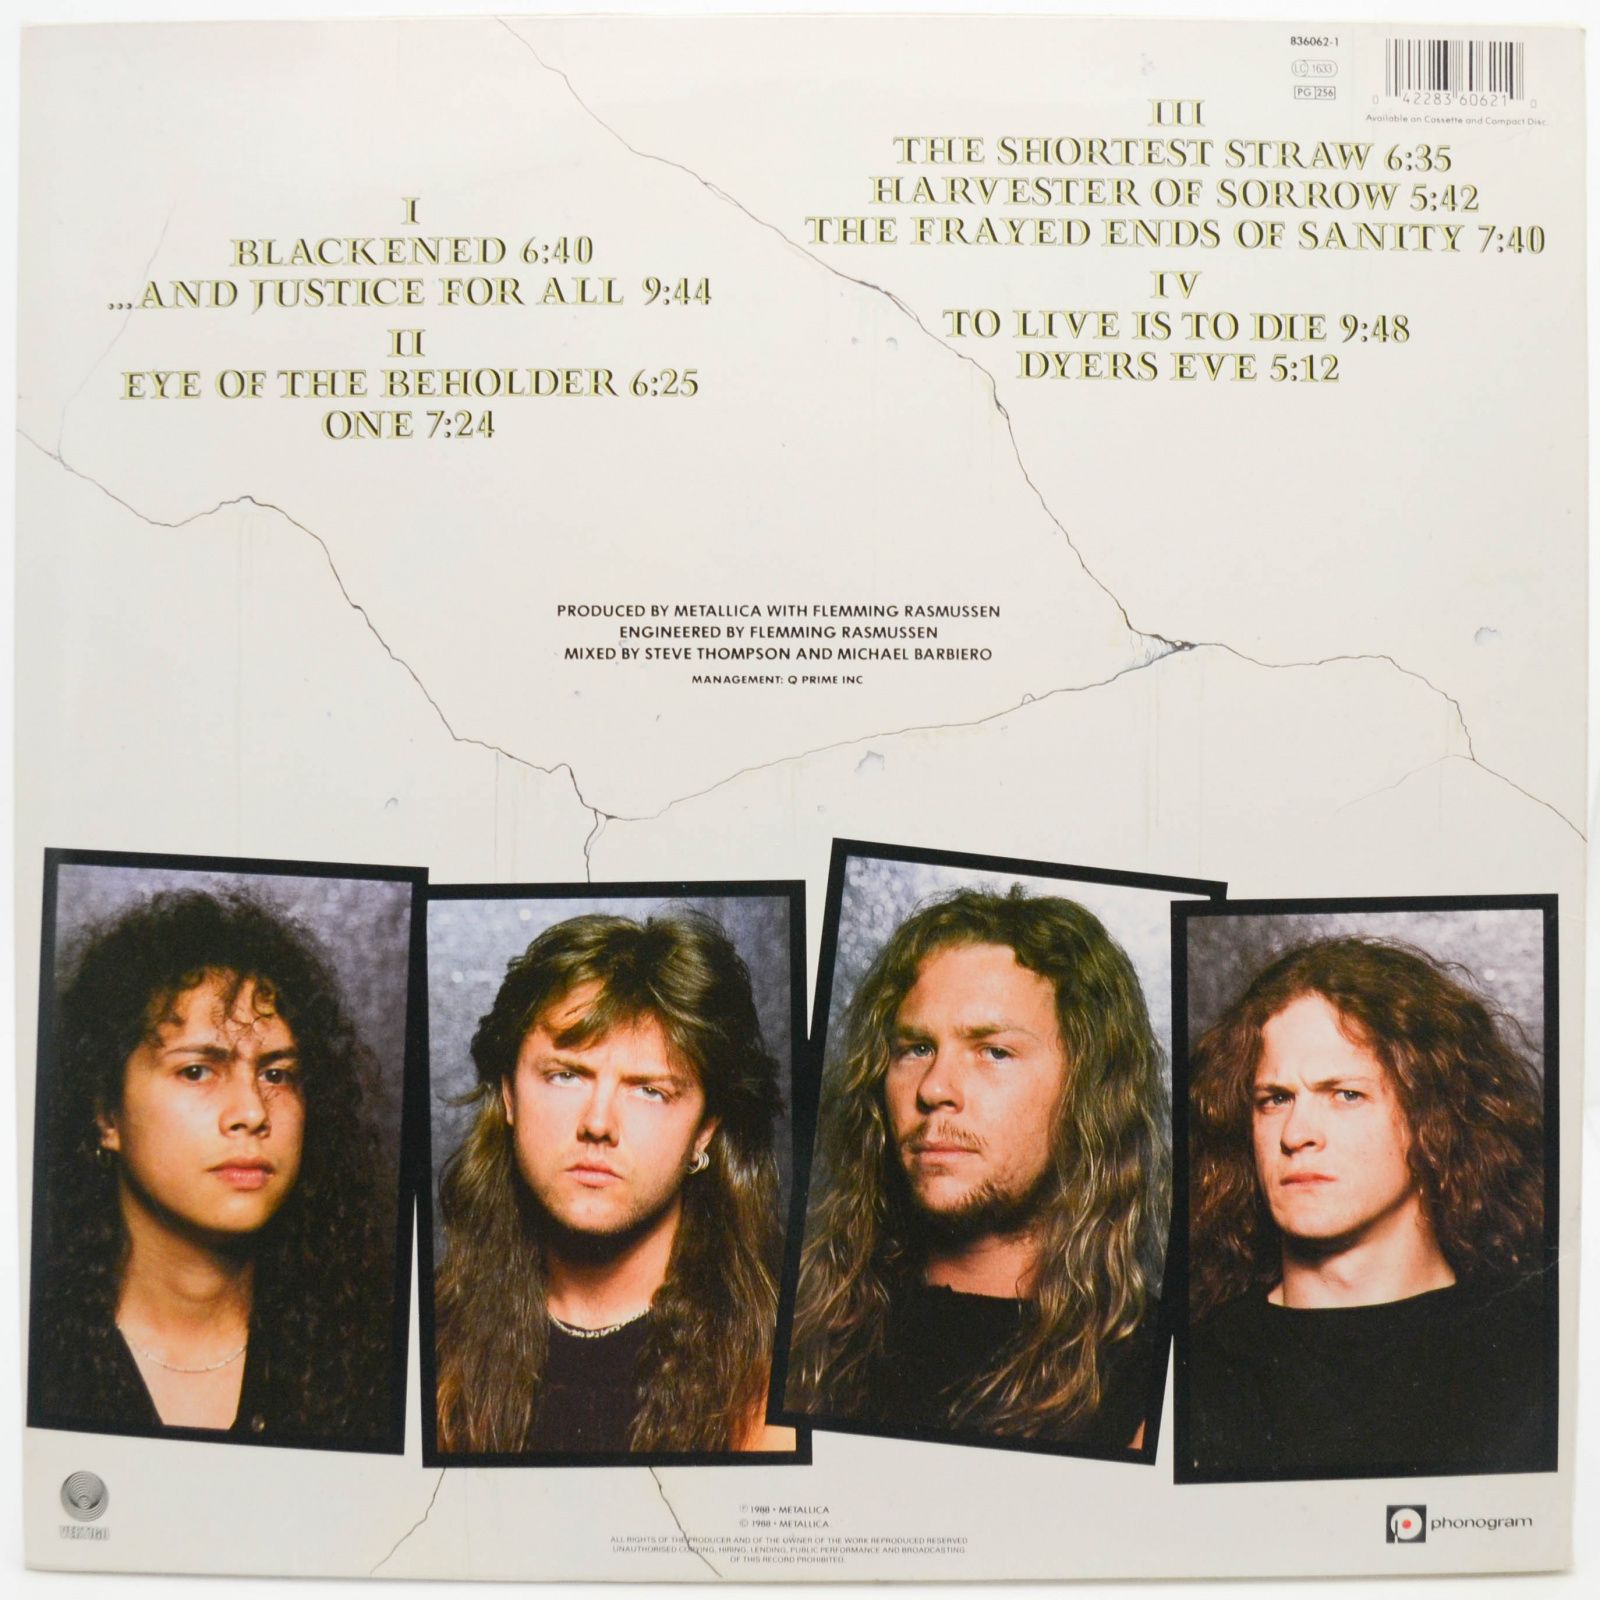 Metallica — ...And Justice For All (2LP), 1988